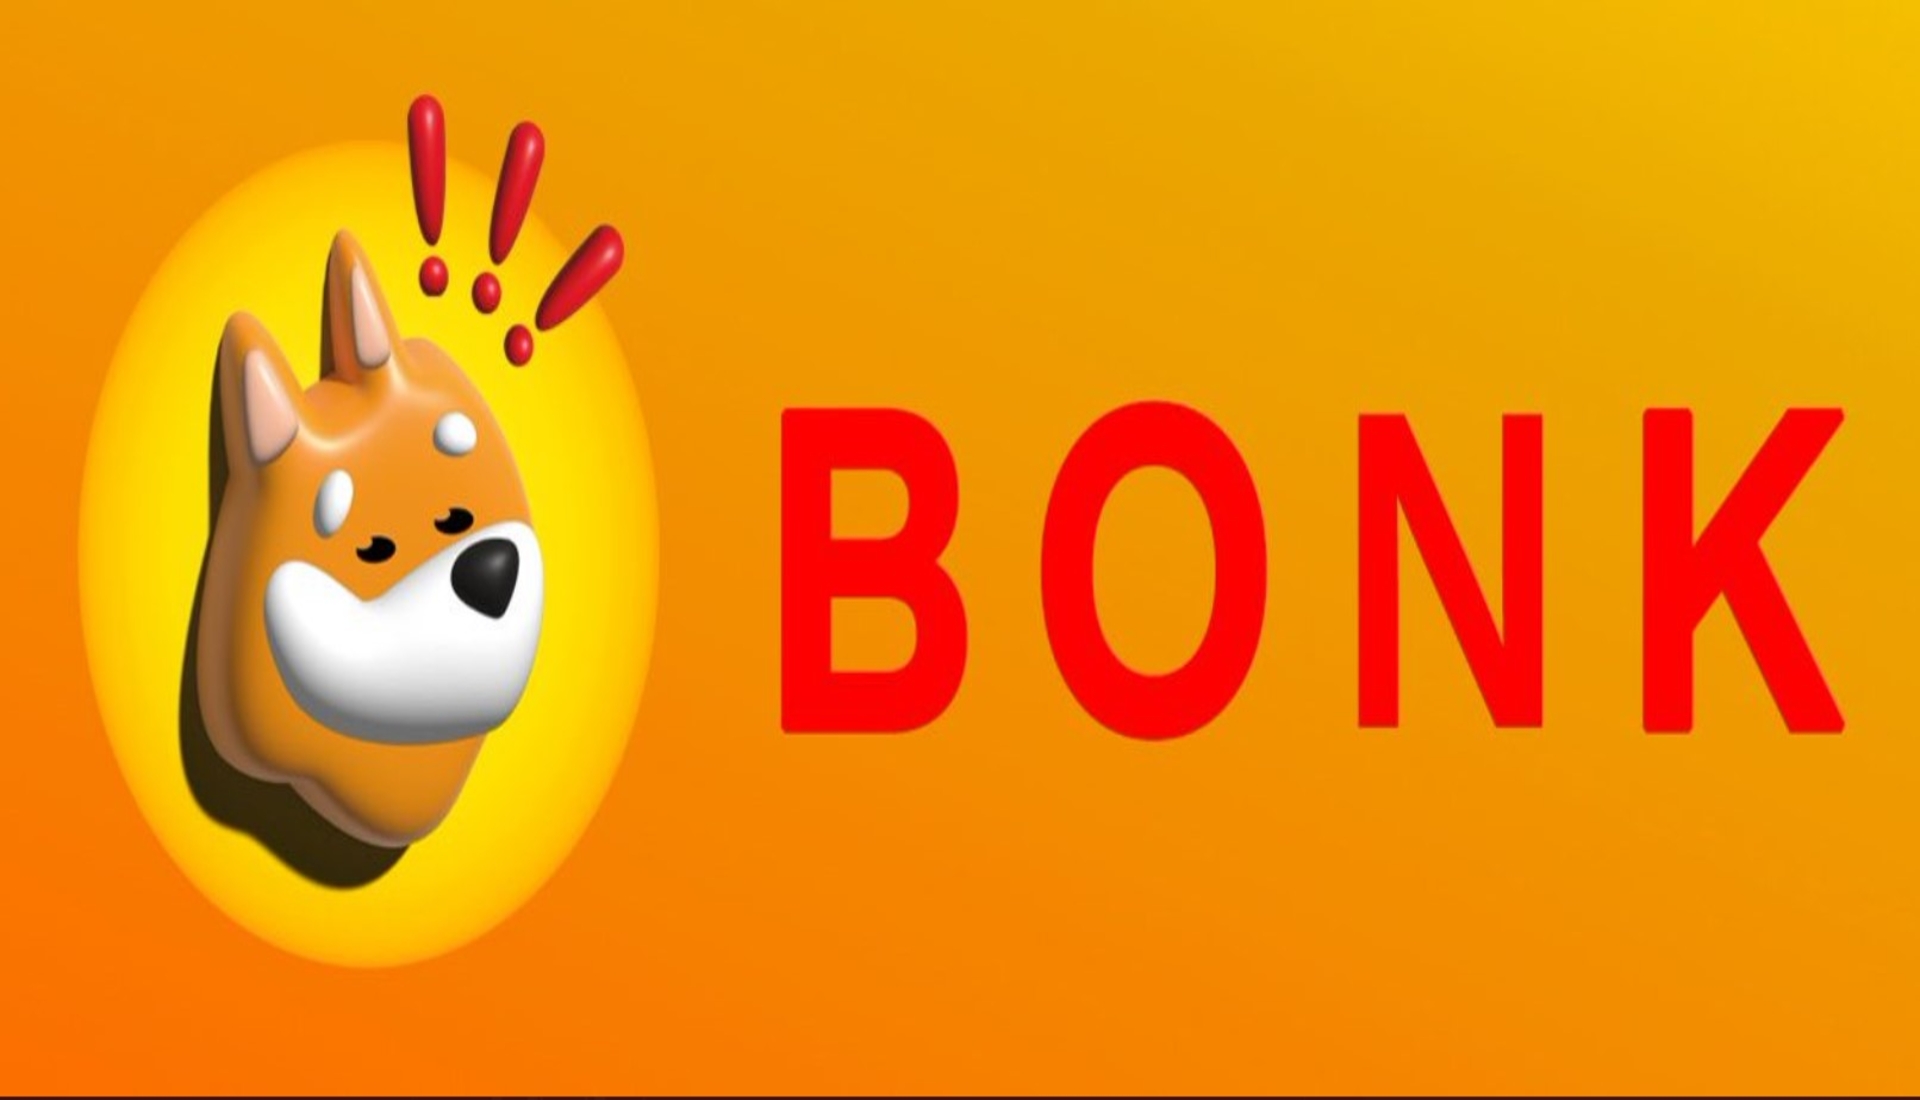 Bonk Inu price recorded nearly 790% in four days, helping SOL price along the way.